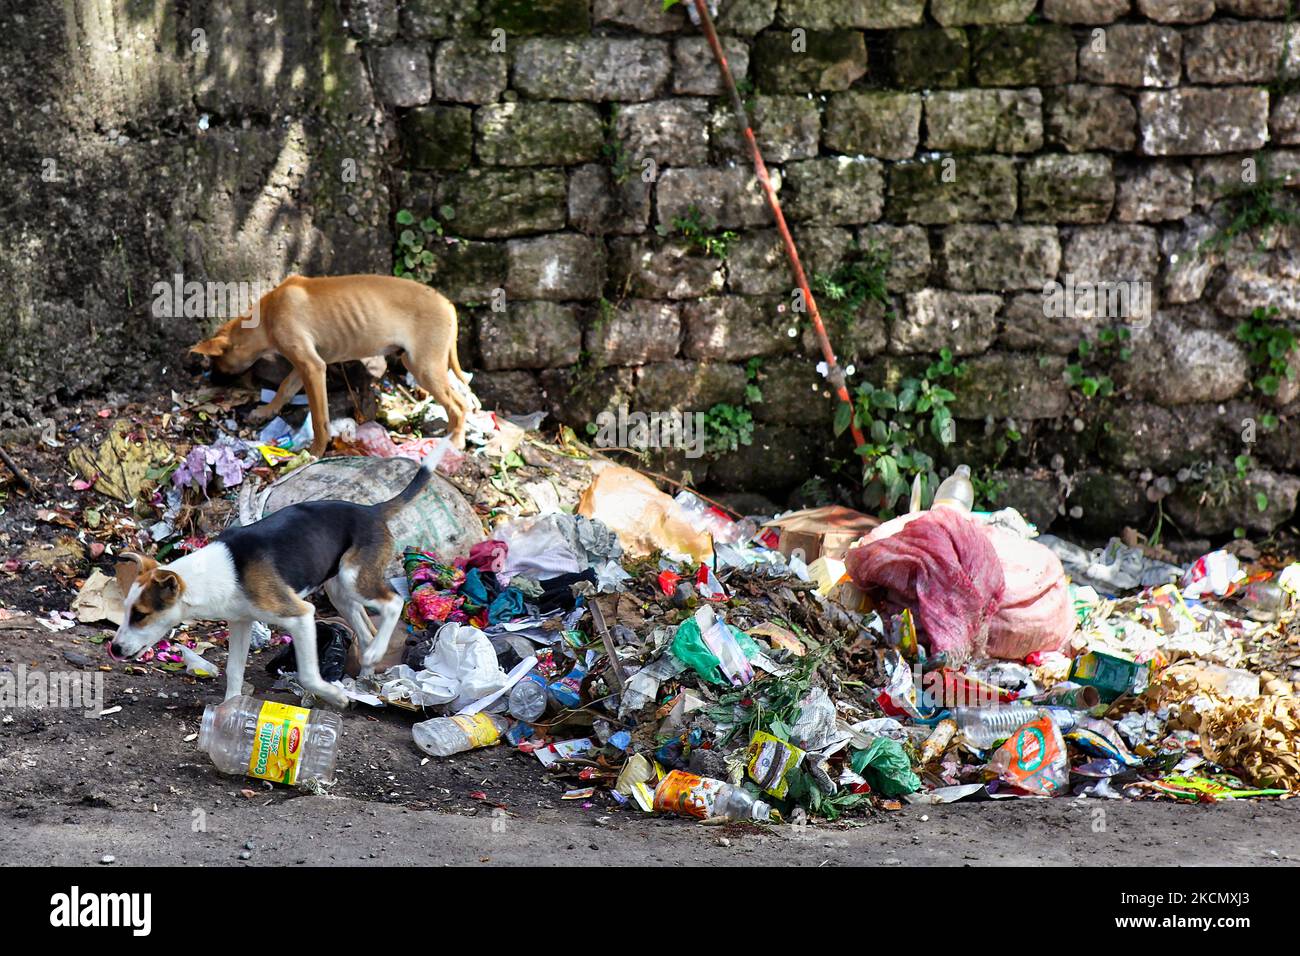 Stray dogs scavenging for food in a pile of rubbish along the roadside in Darjeeling, West Bengal, India, on May 31, 2010. (Photo by Creative Touch Imaging Ltd./NurPhoto) Stock Photo